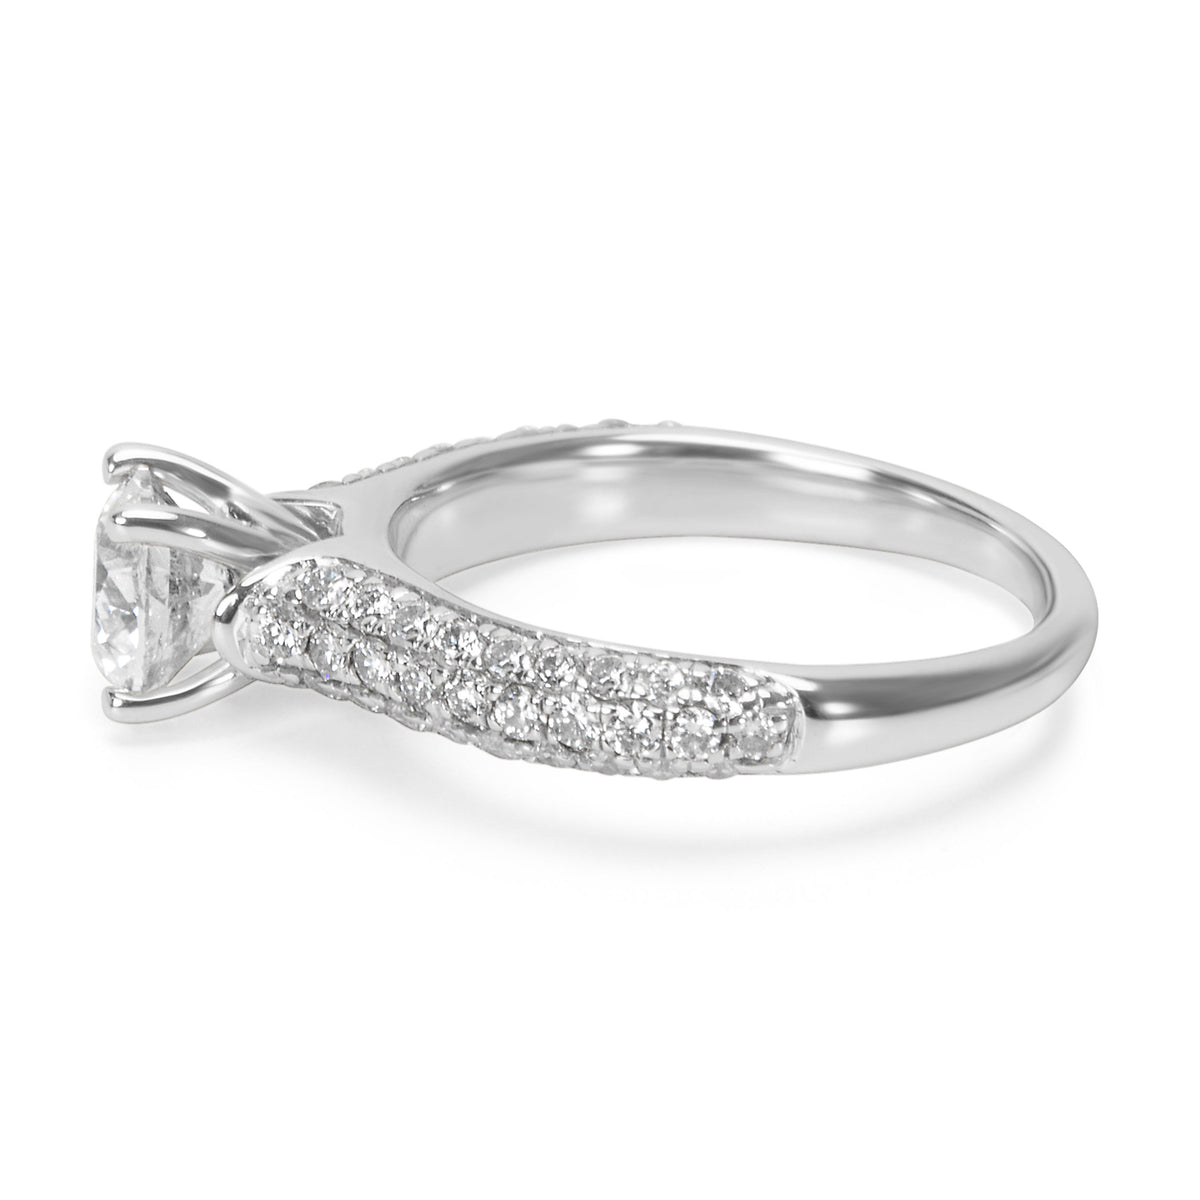 Pave Diamond Engagement Ring in 14K White Gold  (1.25 CTW)